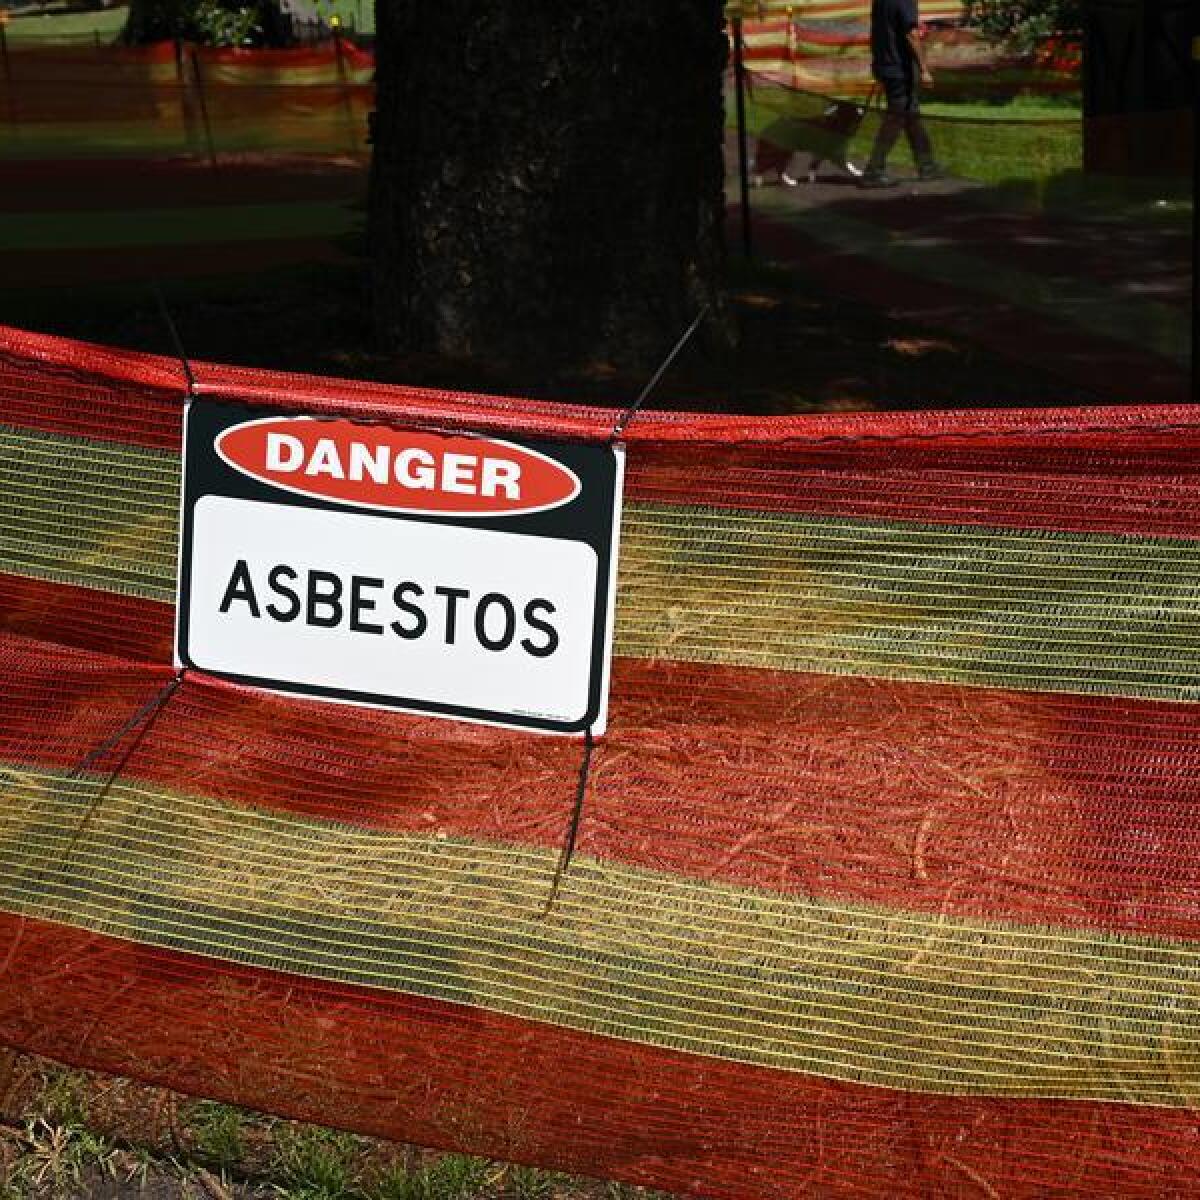 File pic of asbestos sign in a Sydney park